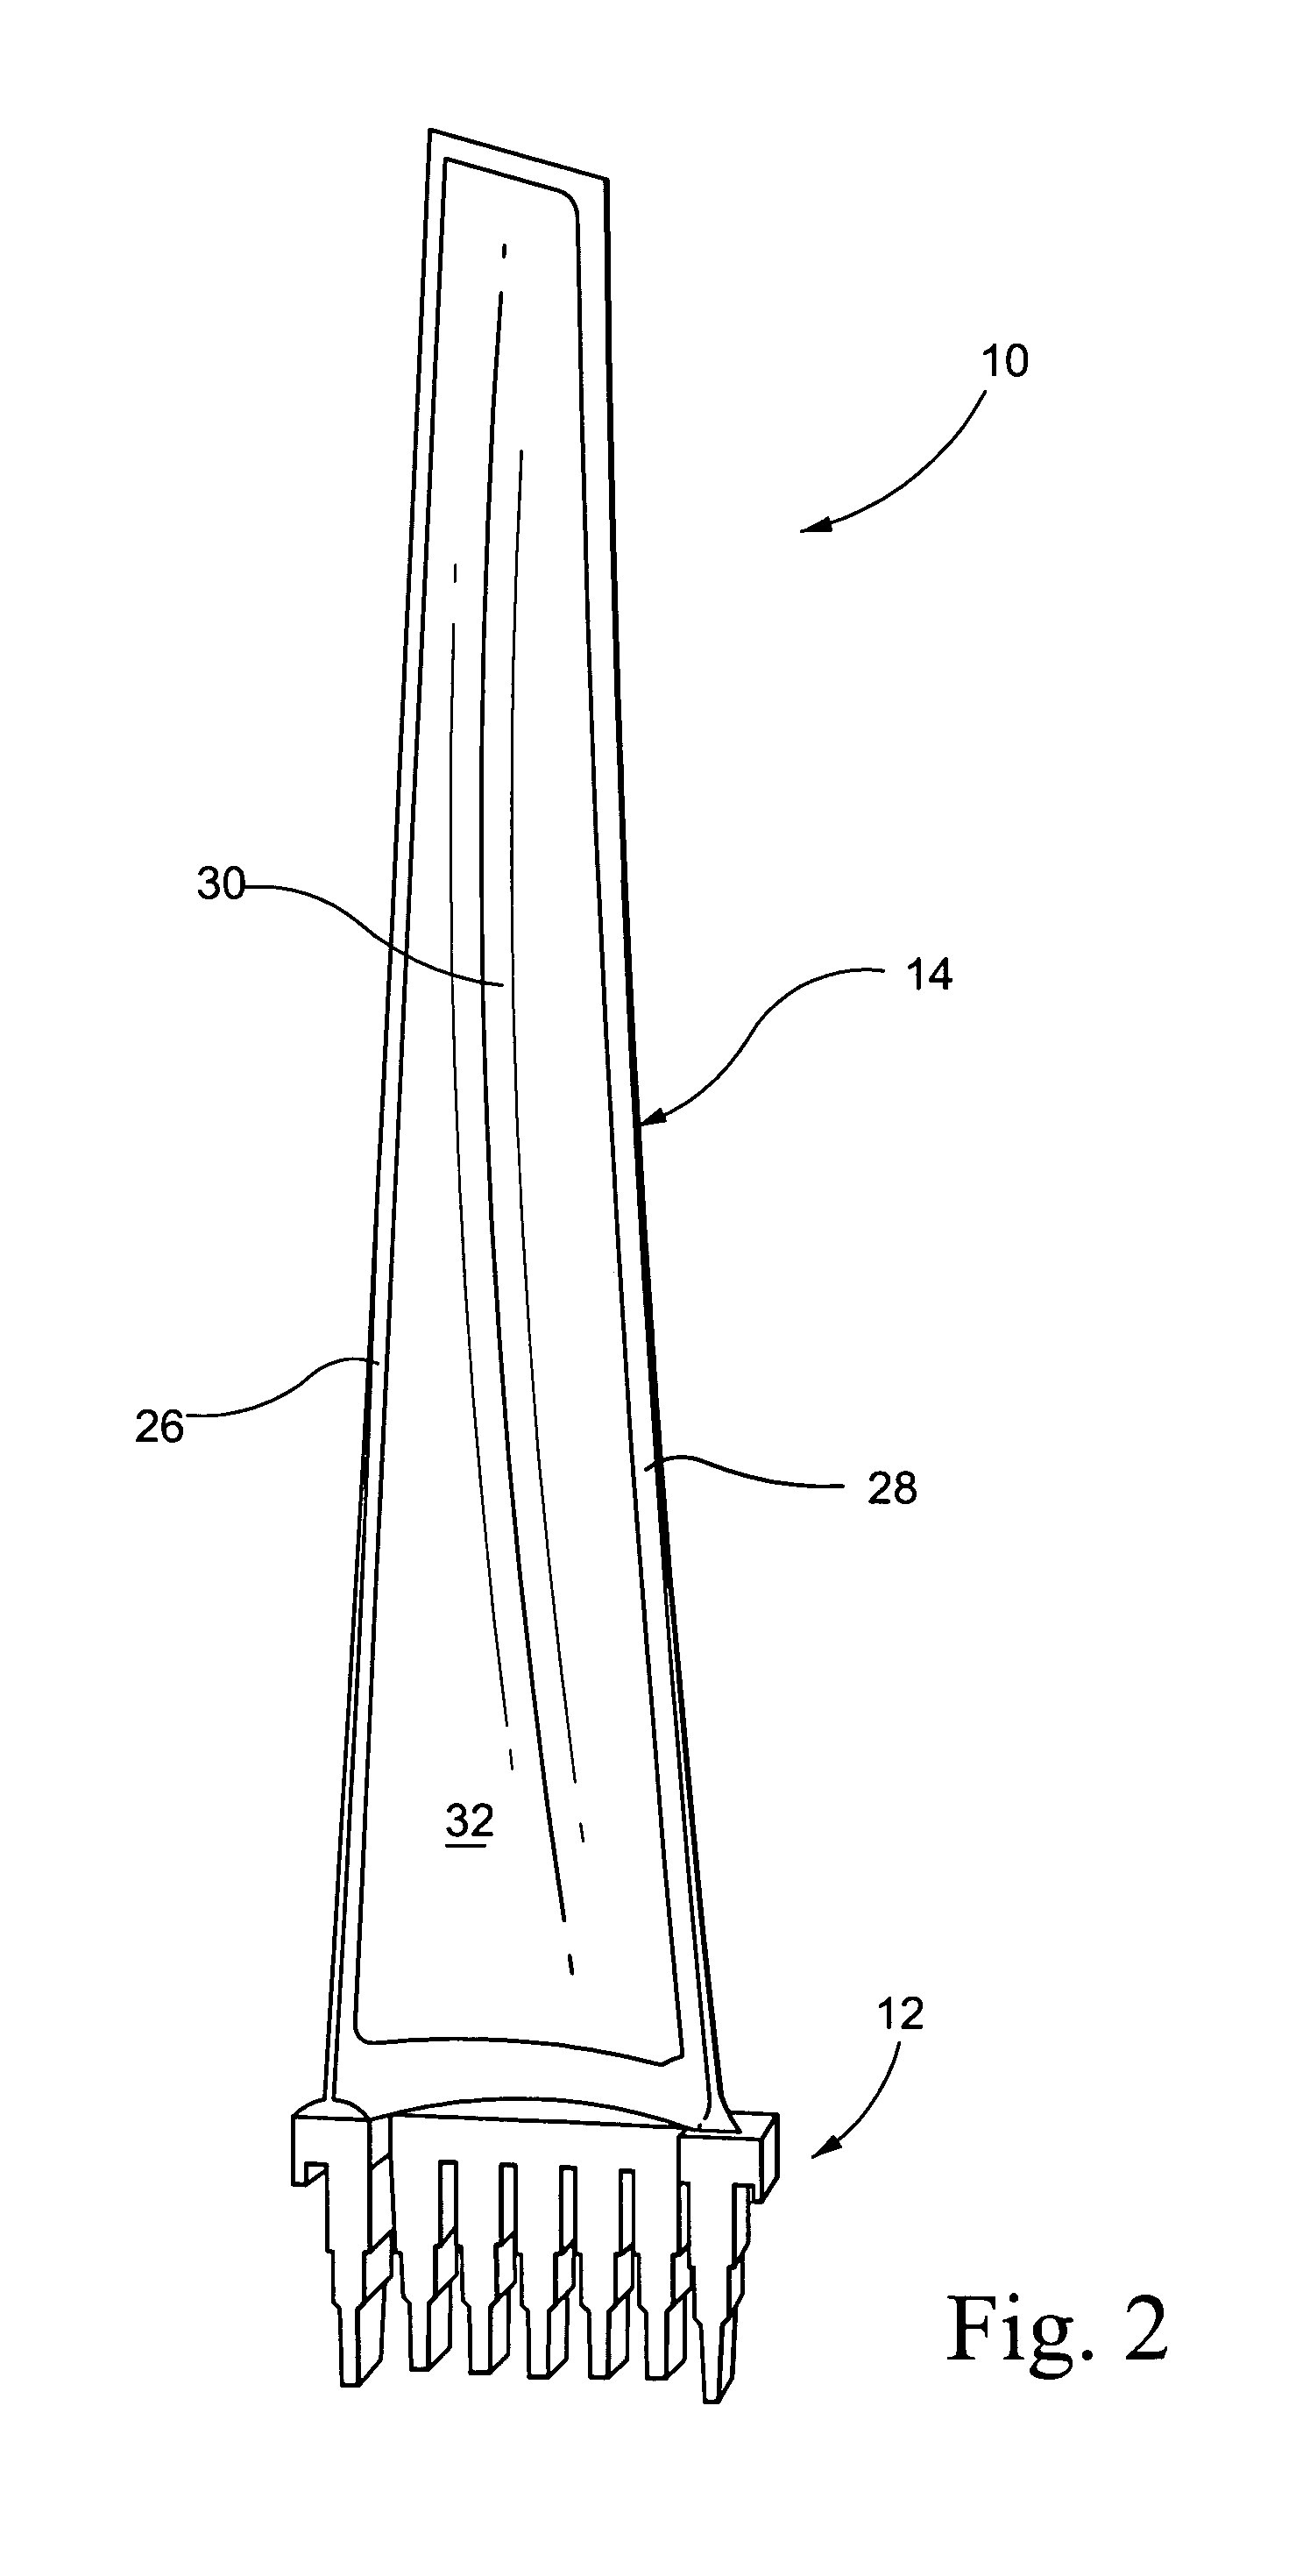 Mixed tuned hybrid blade related method